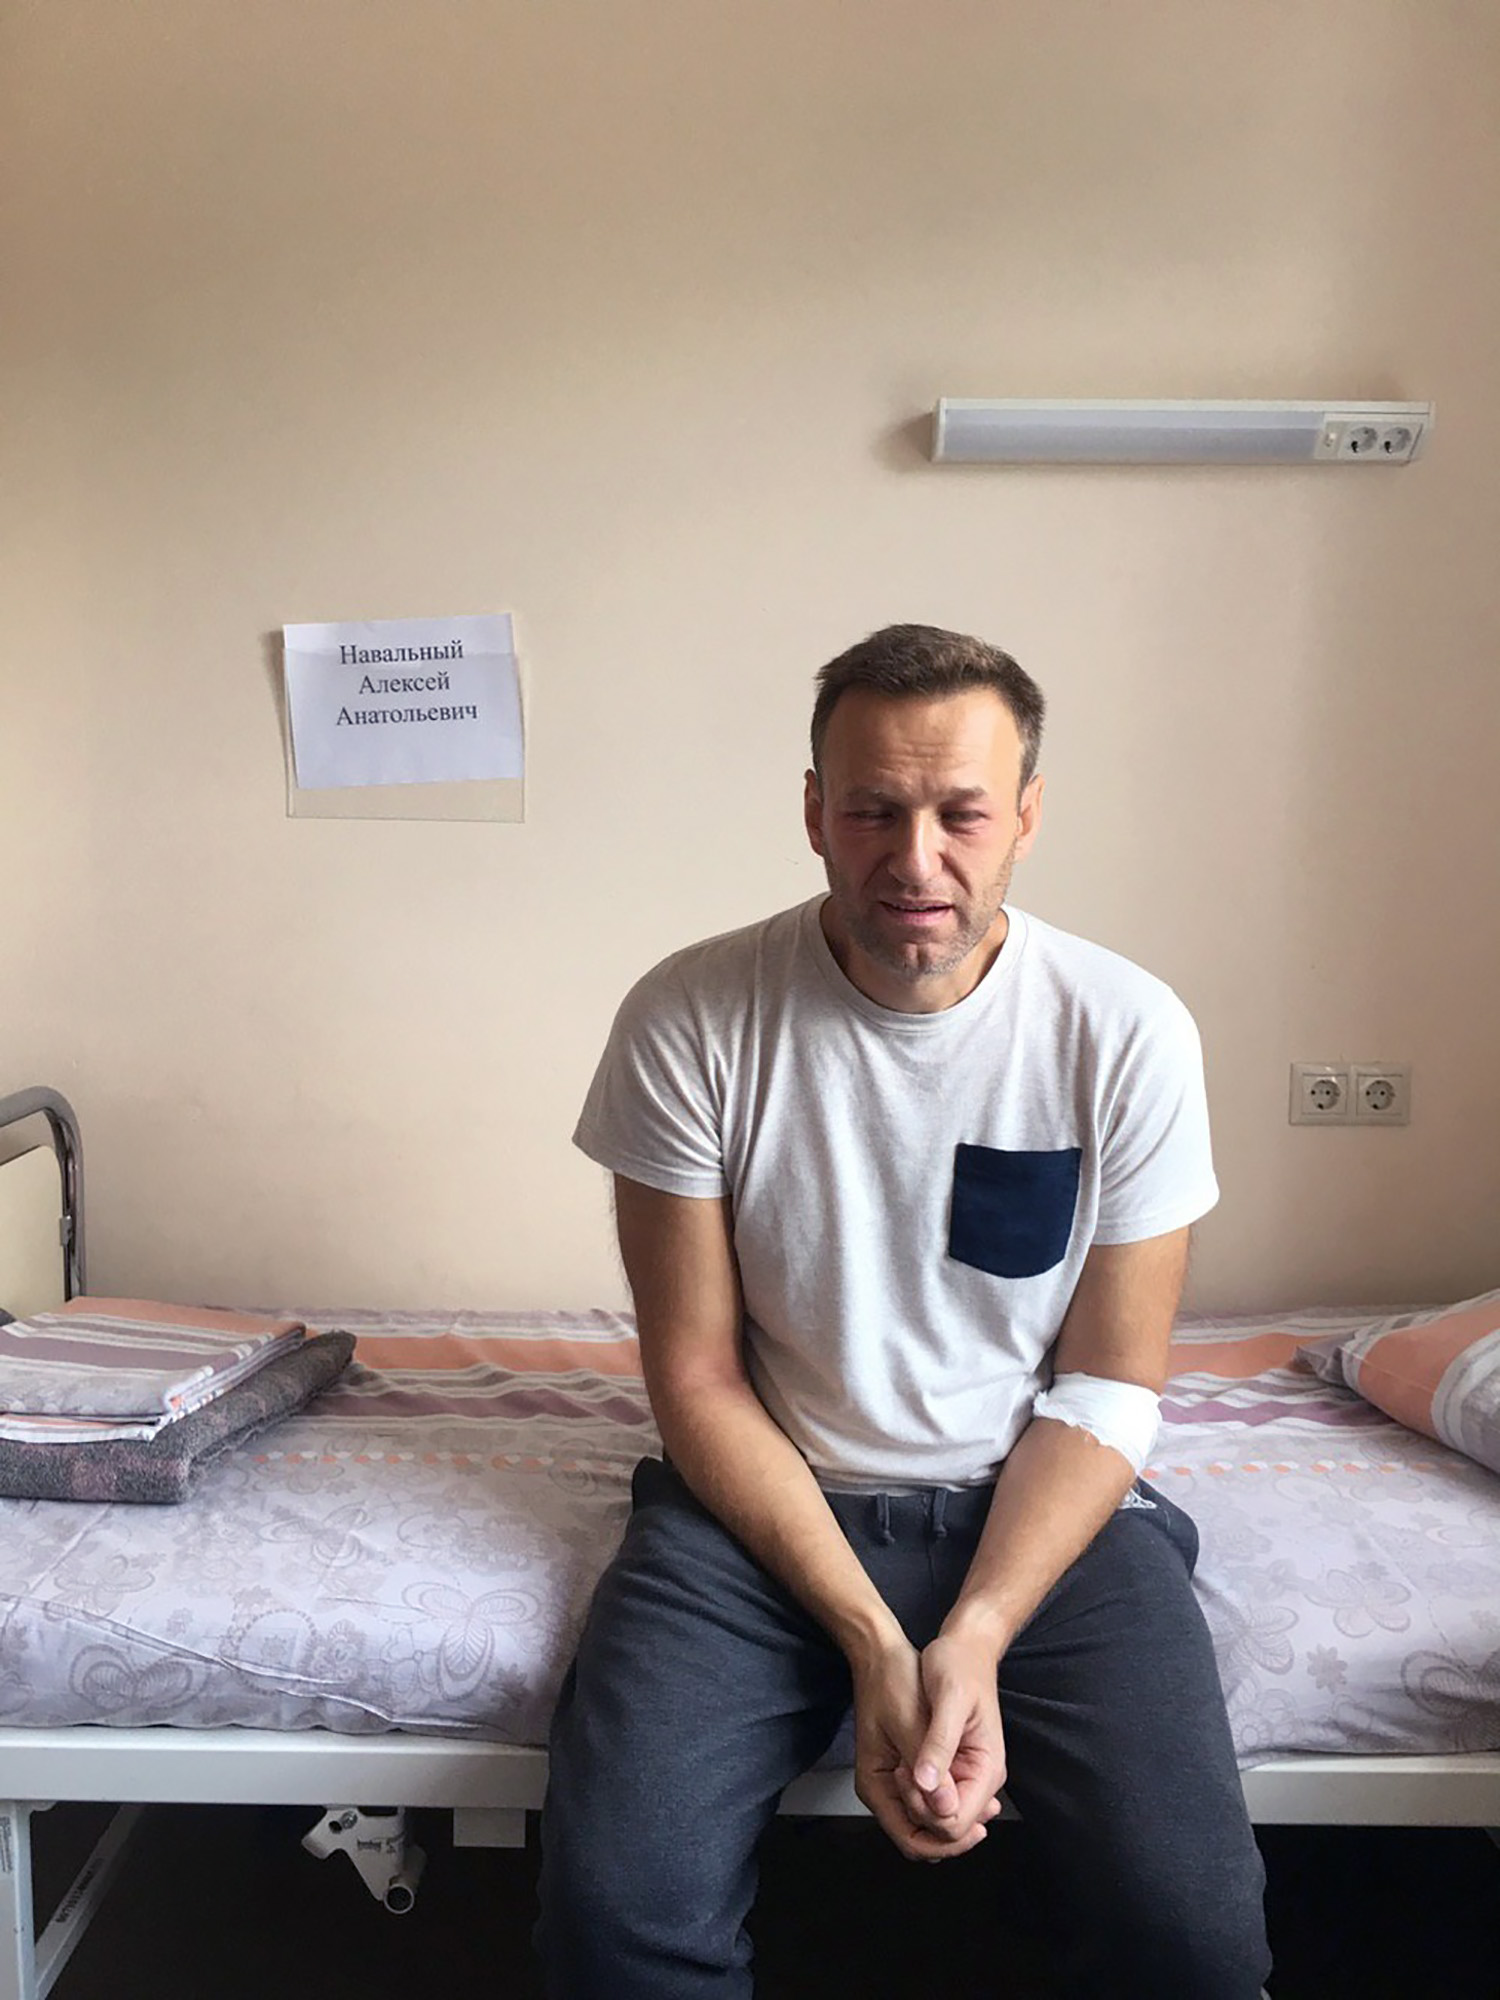 PHOTO: A photo of Russian opposition leader Alexei Navalny sitting on a hospital bed in Moscow, was posted to his website, July 29, 2019. His lawyer says he might have been poisoned while in jail.